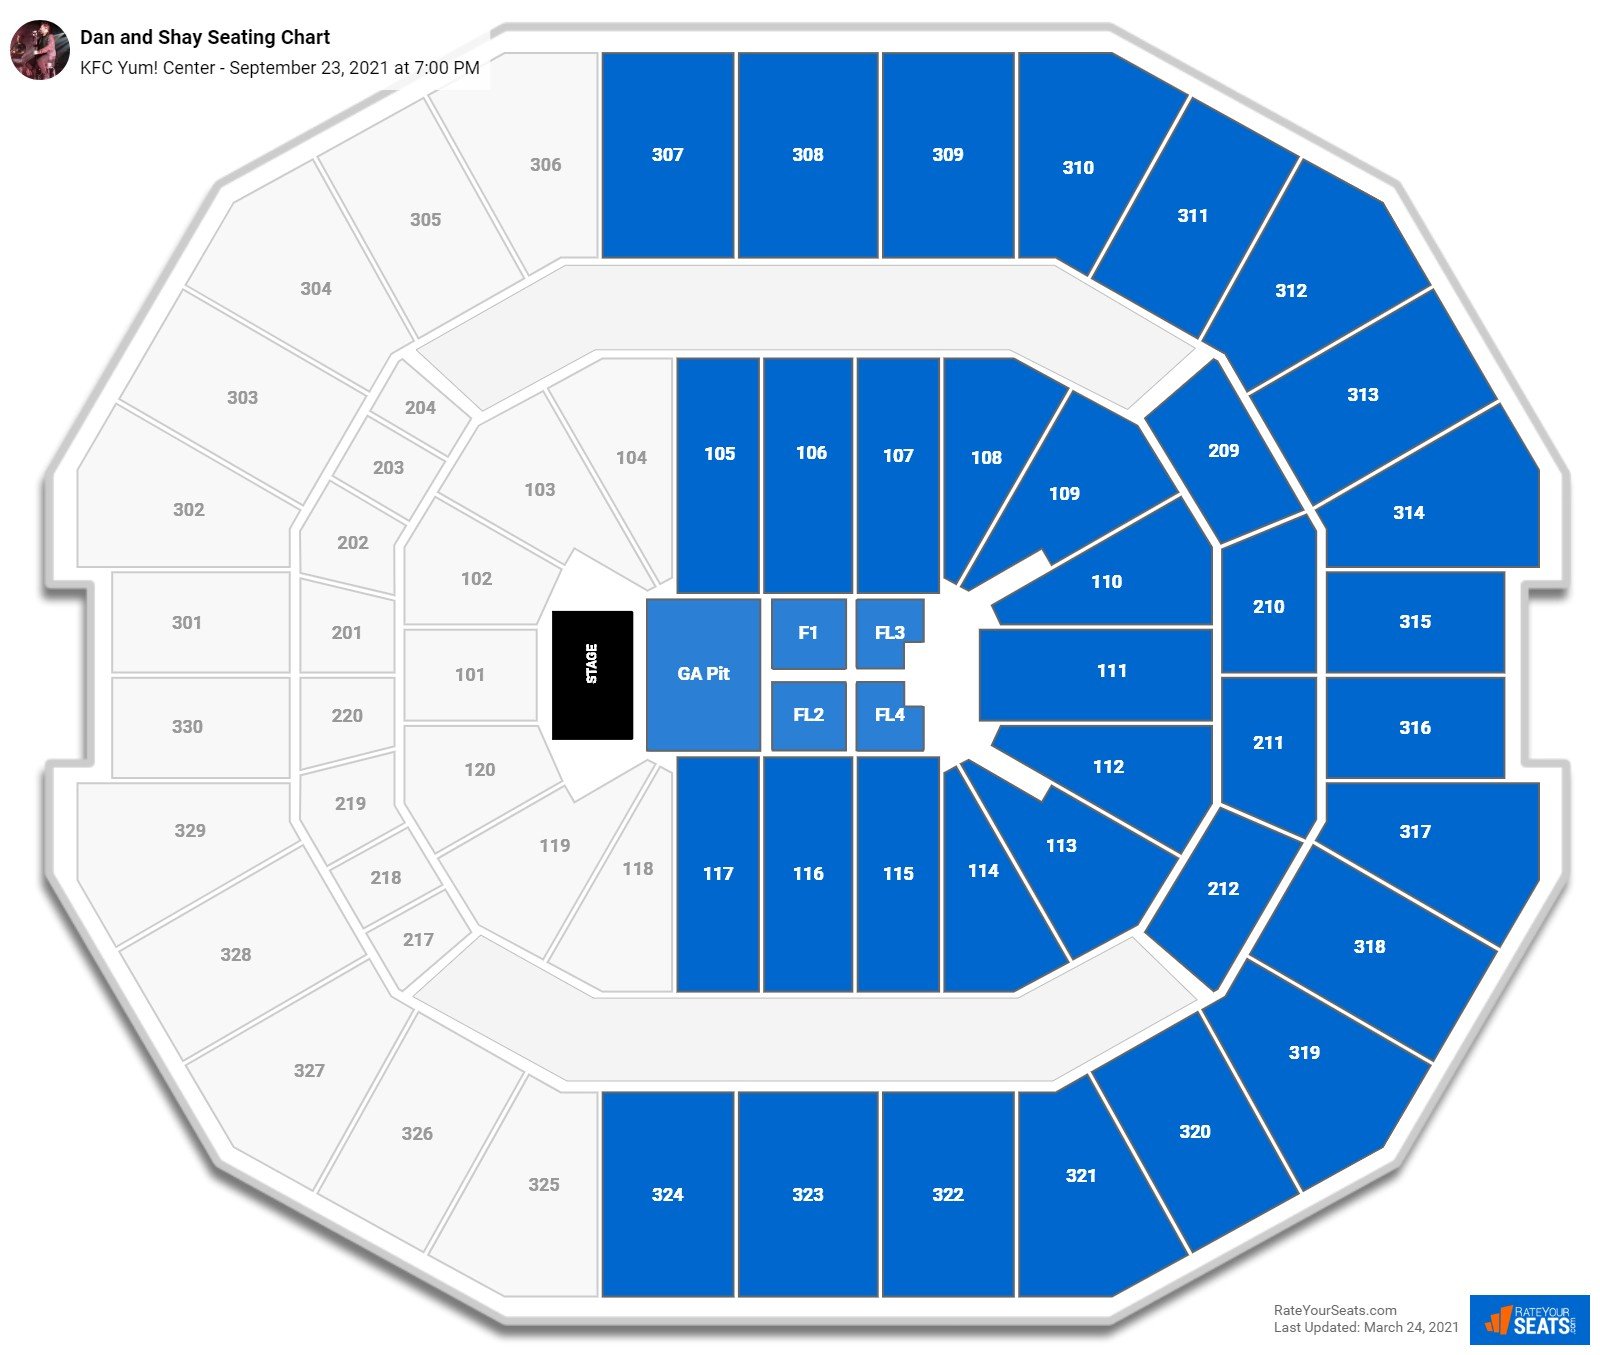 KFC Yum! Center Seating Charts for Concerts